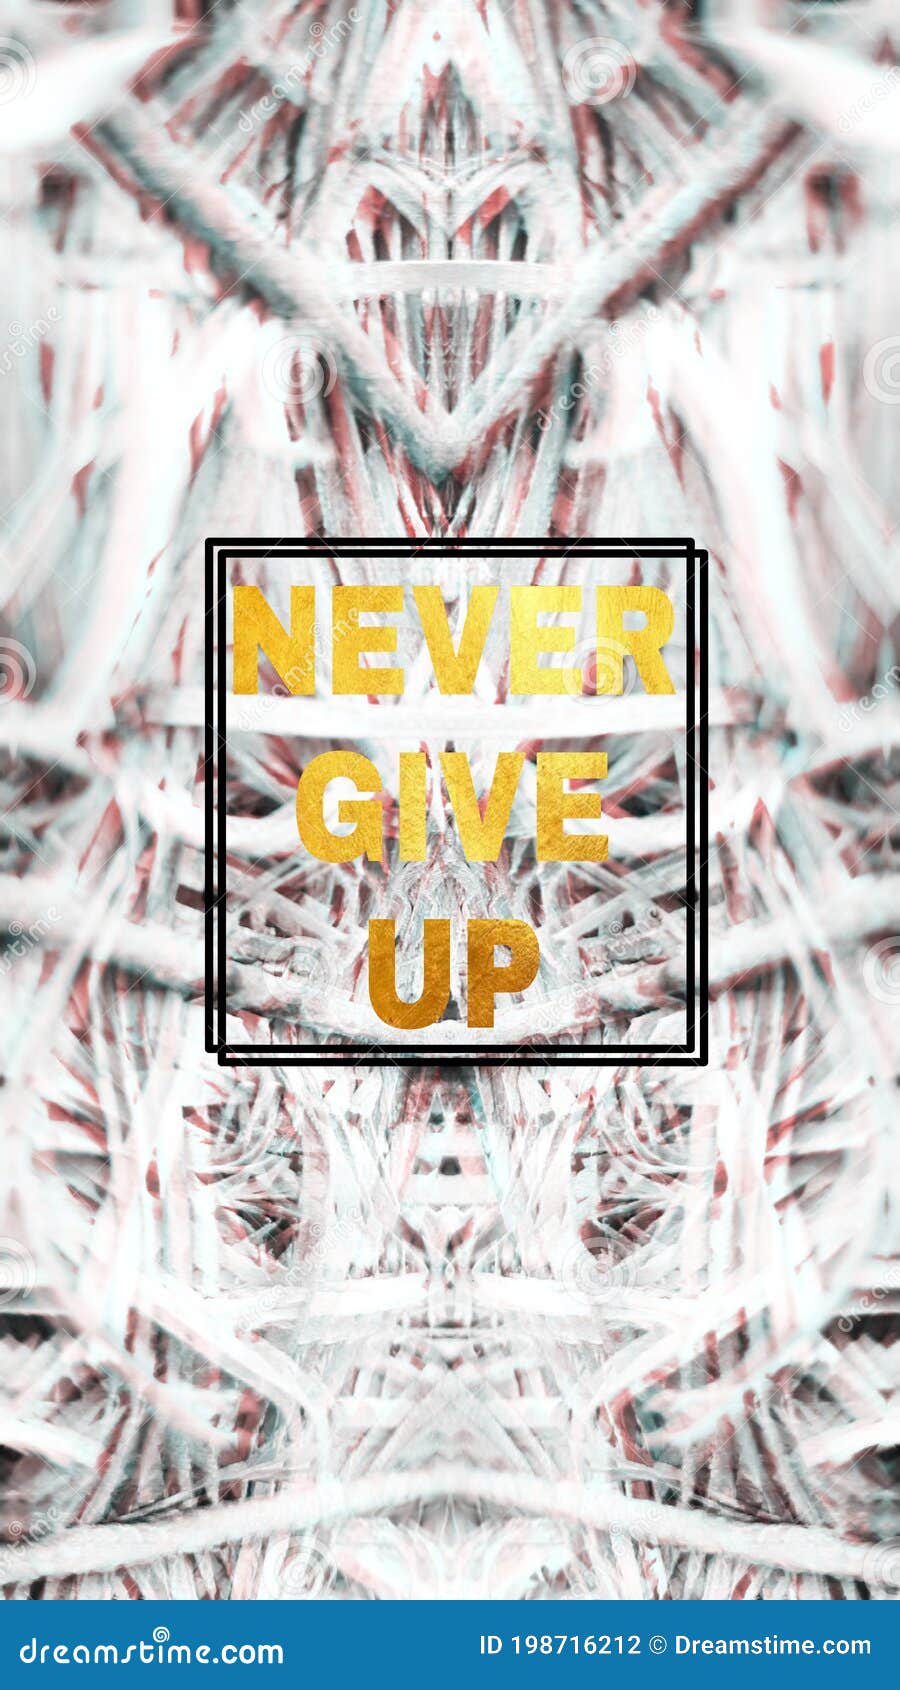 Never Give Up Wallpaper stock photo. Image of wallpaper - 198716212